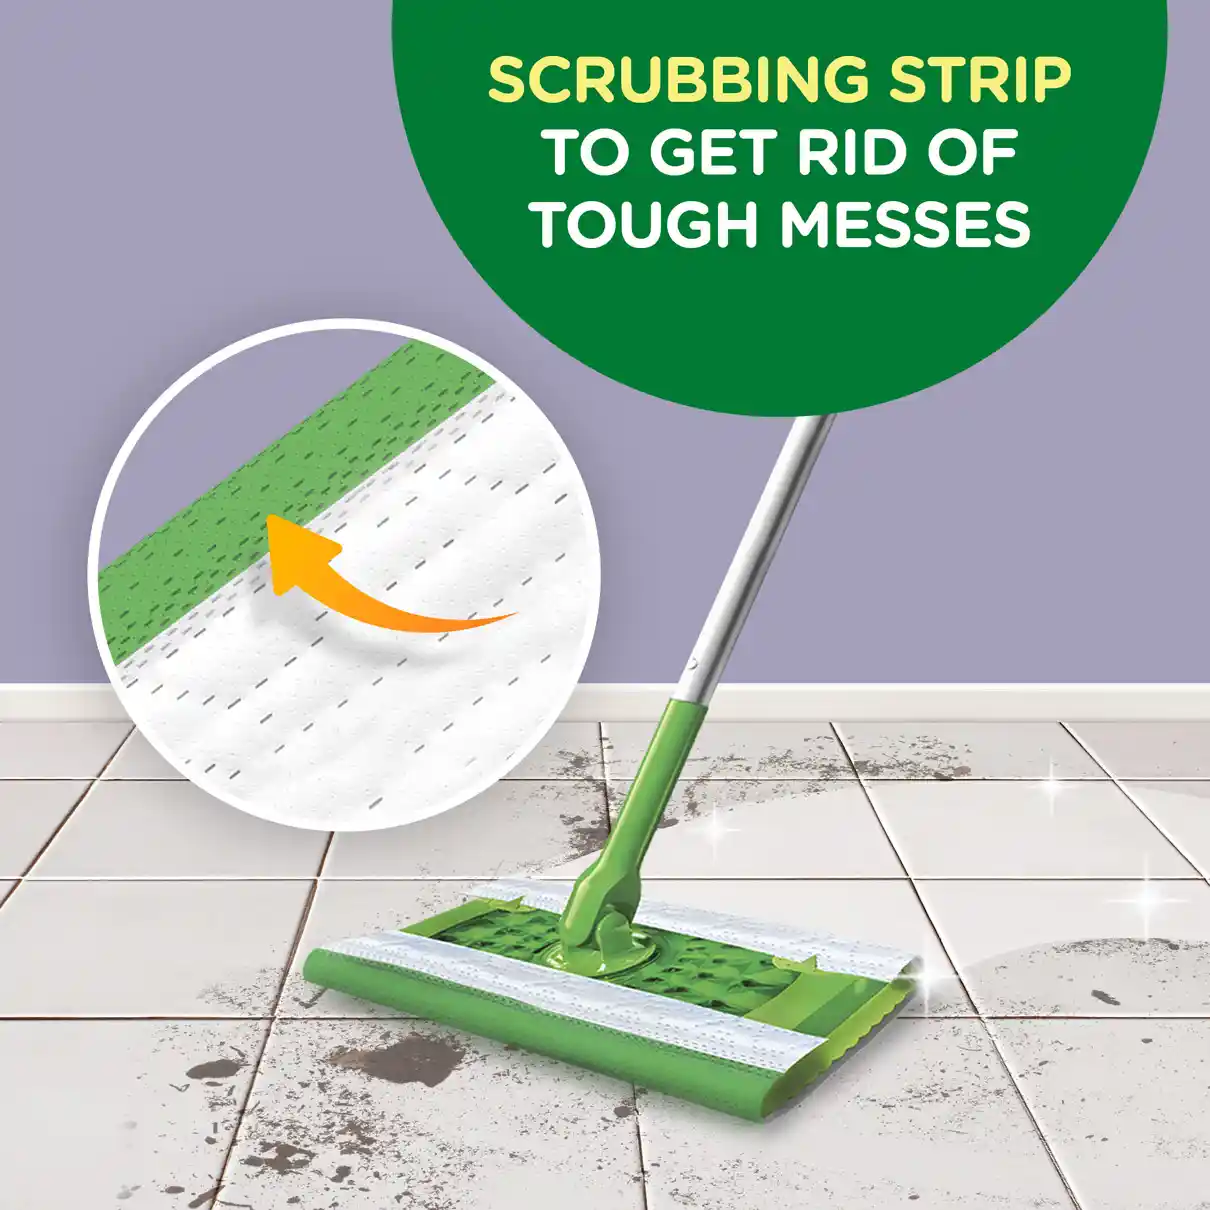 Swiffer Sweeper Wet Mopping Cloths With Febreze Freshness